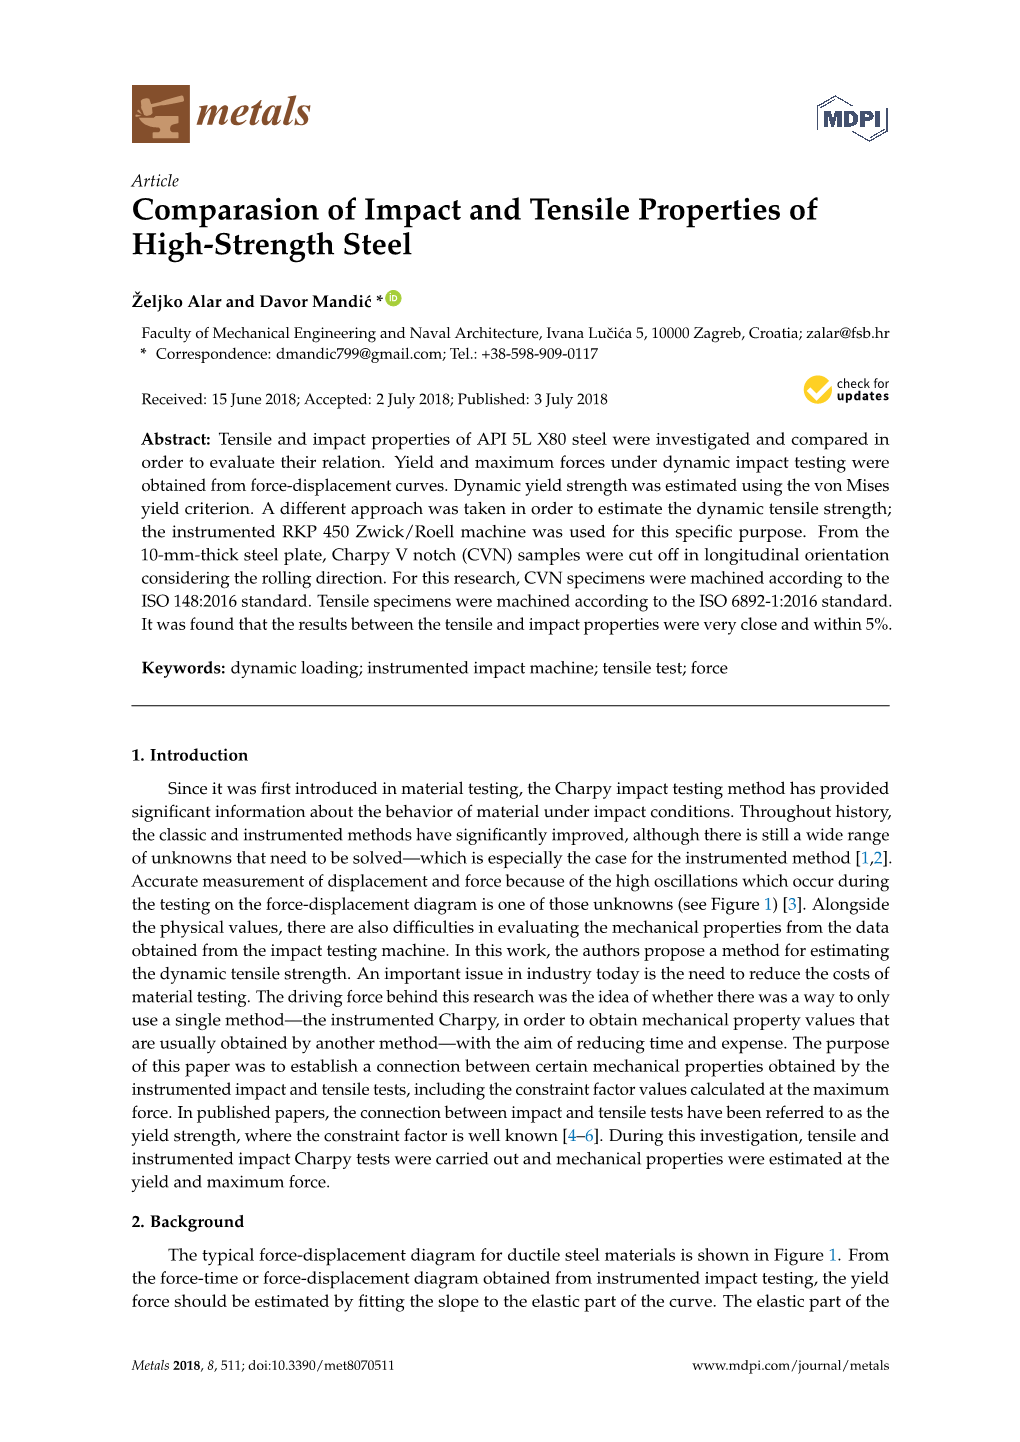 Comparasion of Impact and Tensile Properties of High-Strength Steel